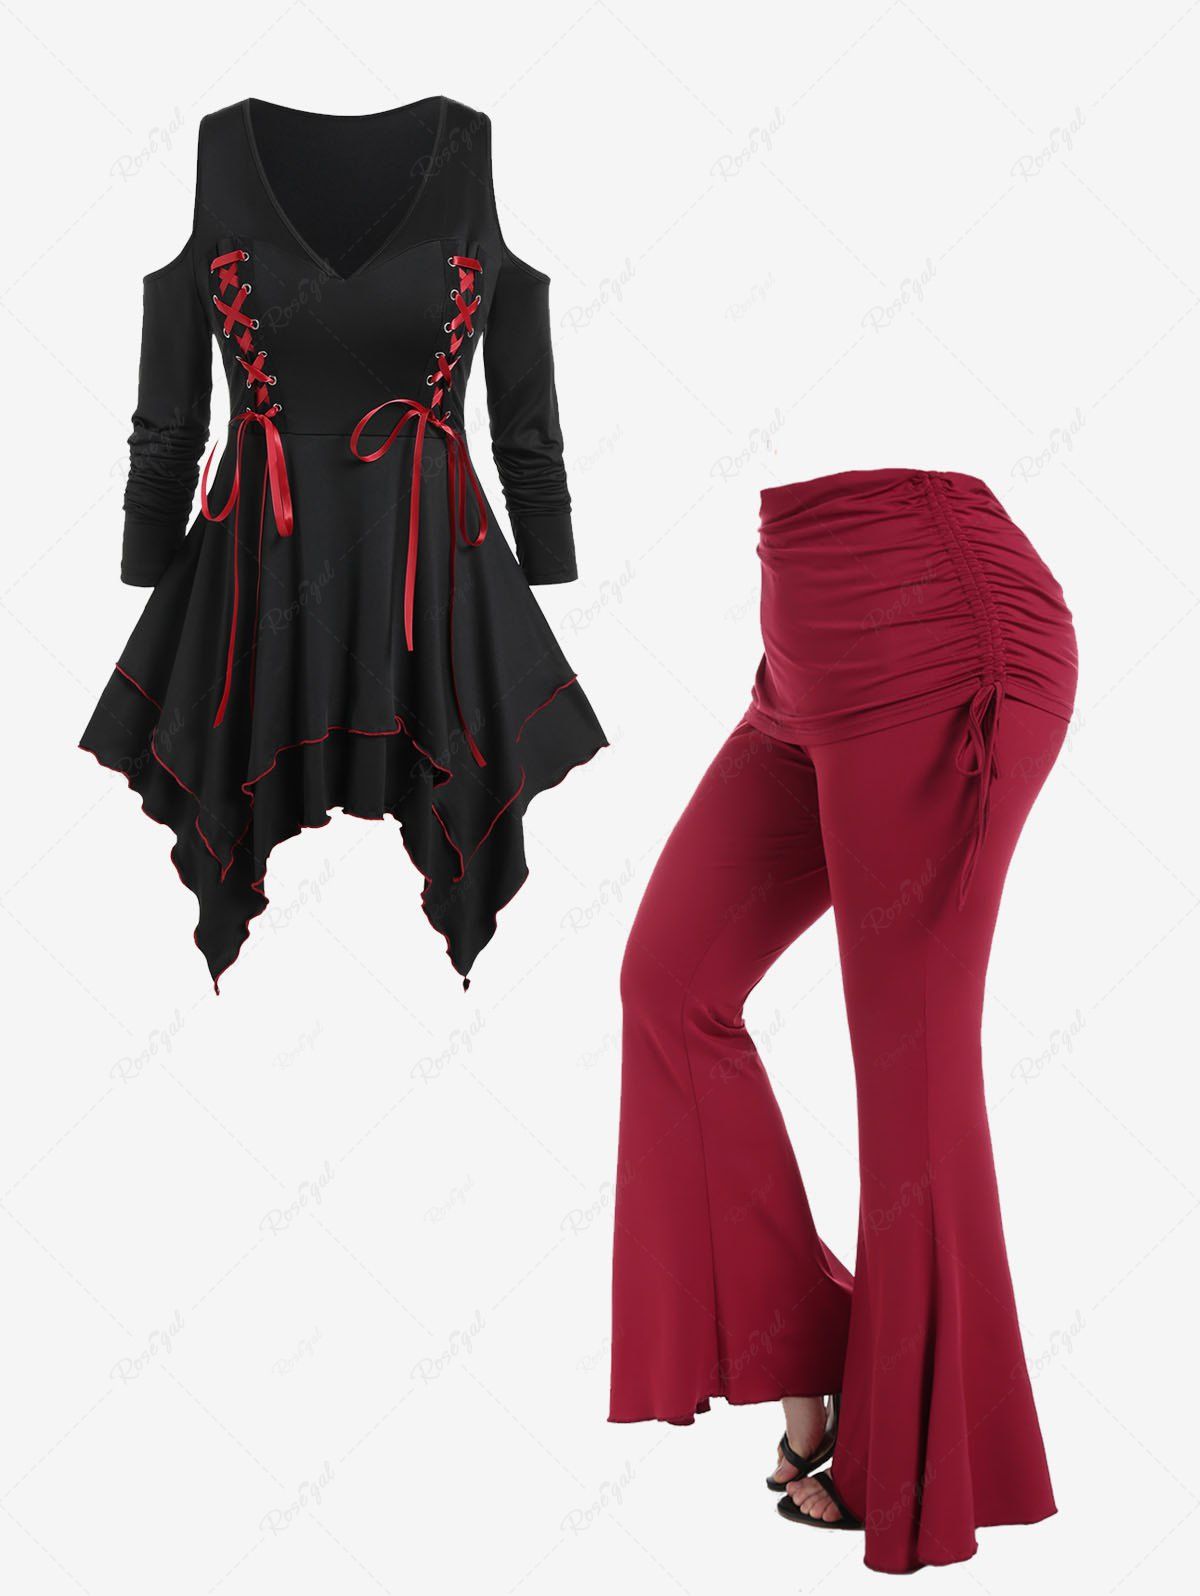 Chic Gothic Lace Up Cold Shoulder Double Layered Handkerchief Tee and High Waist Cinched Bell Bottom Pants Outfit  